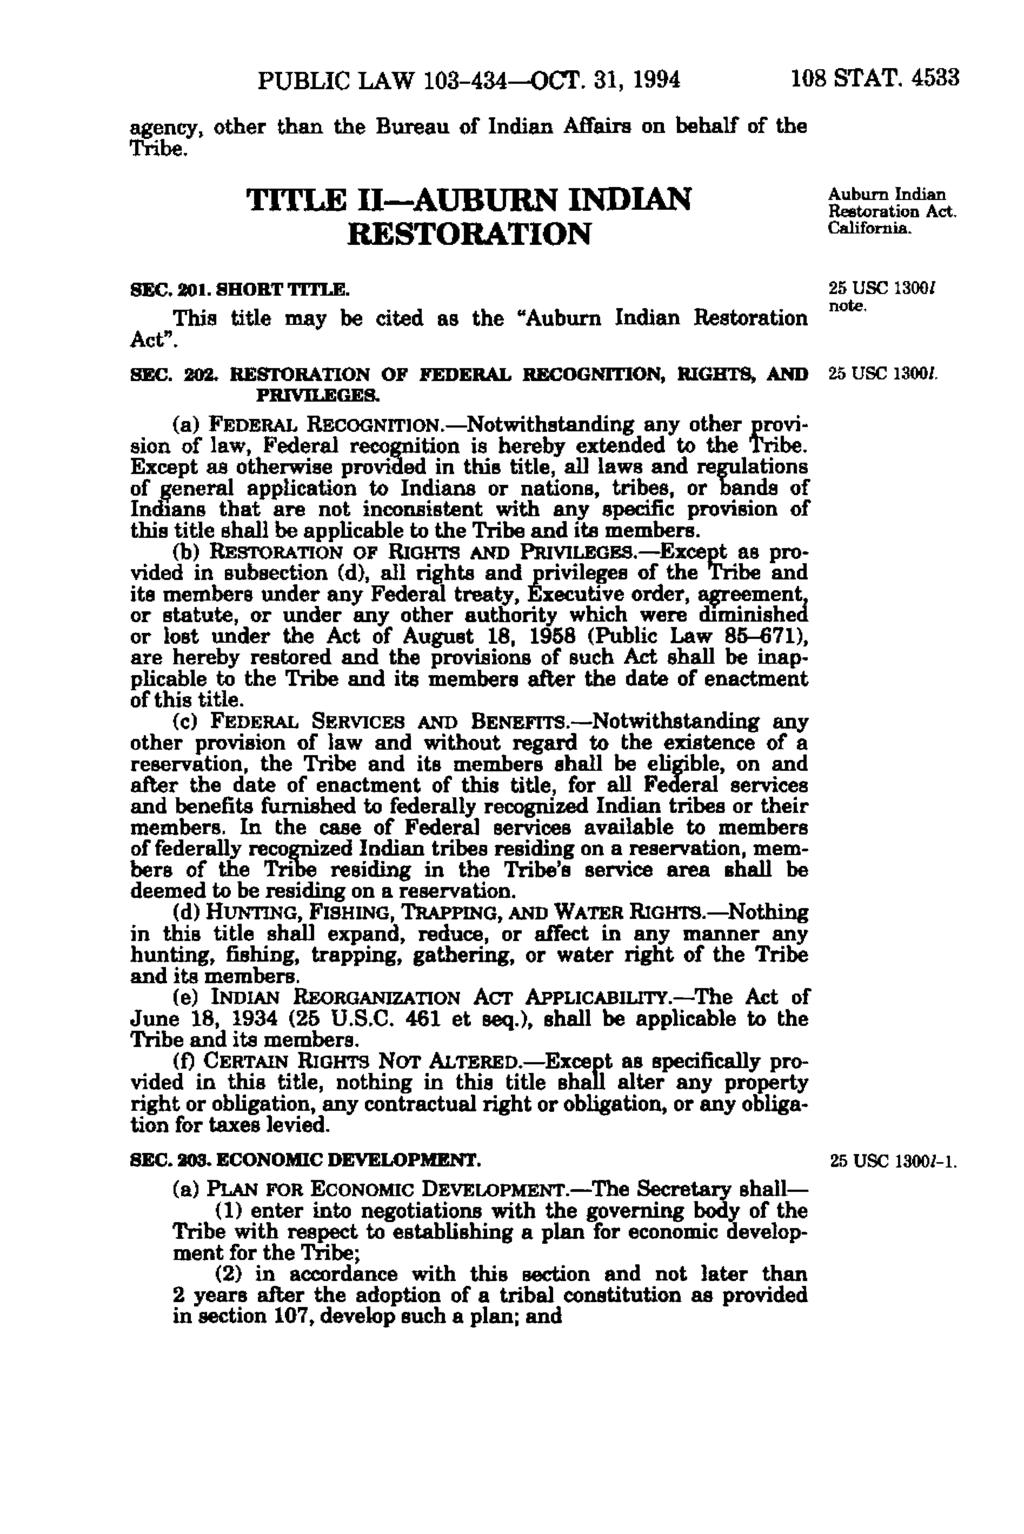 PUBLIC LAW 103-434 OCT. 31, 1994 108 STAT. 4533 agency, other than the Bureau of Indian Affairs on behalf of the Tribe. TITLE II-AUBURN INDIAN ffisffist RESTORATION Criifc ta - SBC. 201. SHOBT TITLE.